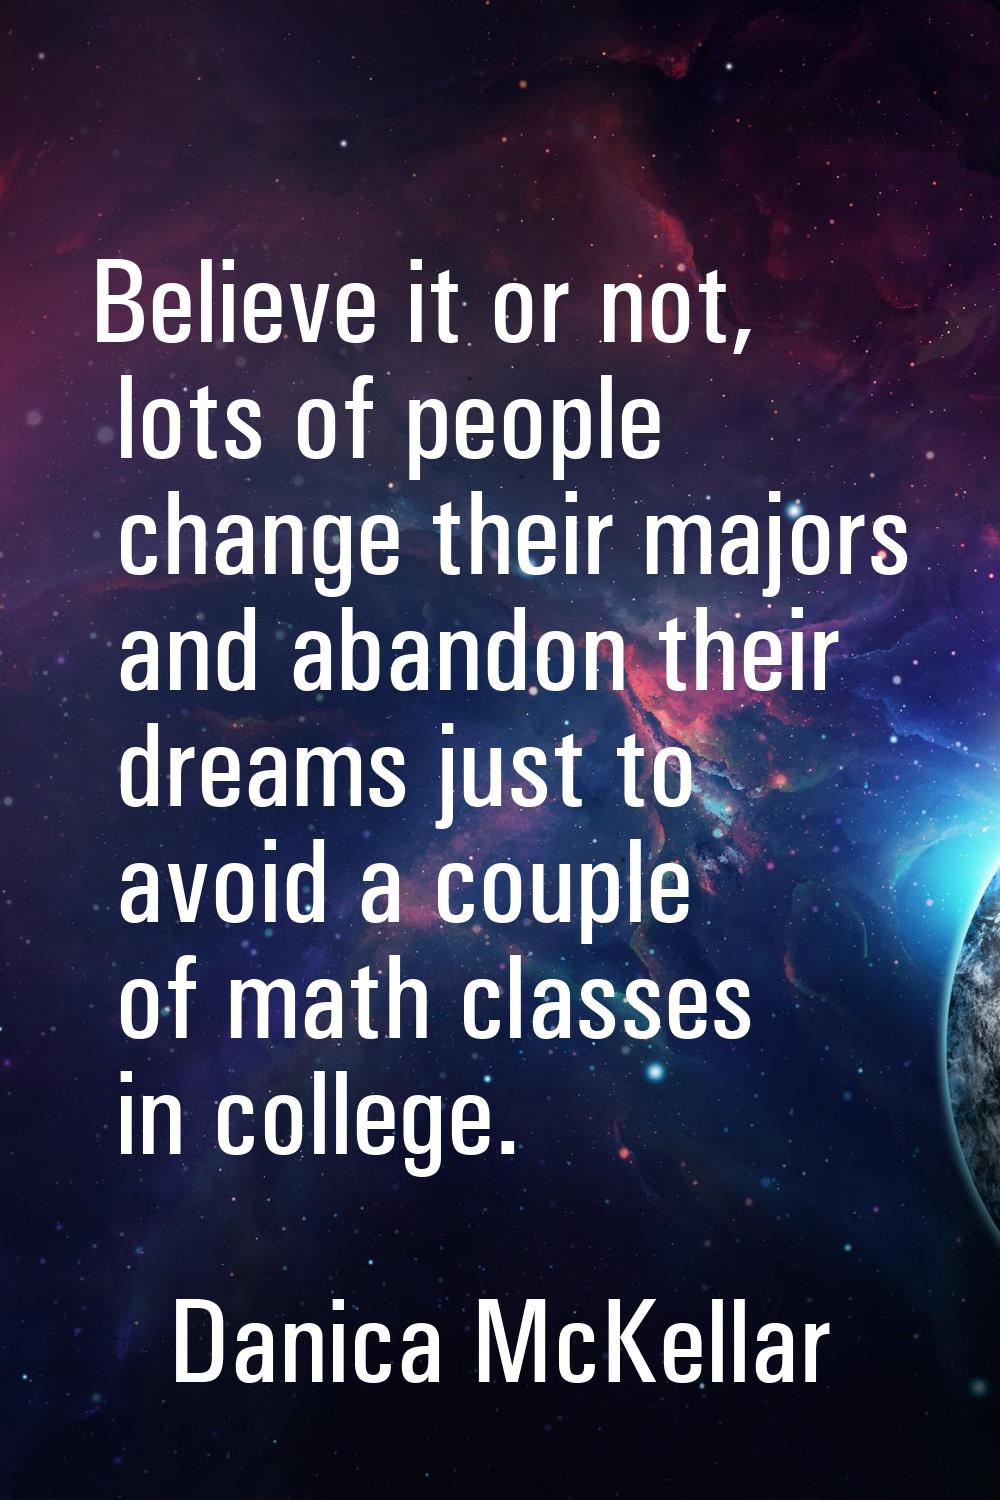 Believe it or not, lots of people change their majors and abandon their dreams just to avoid a coup